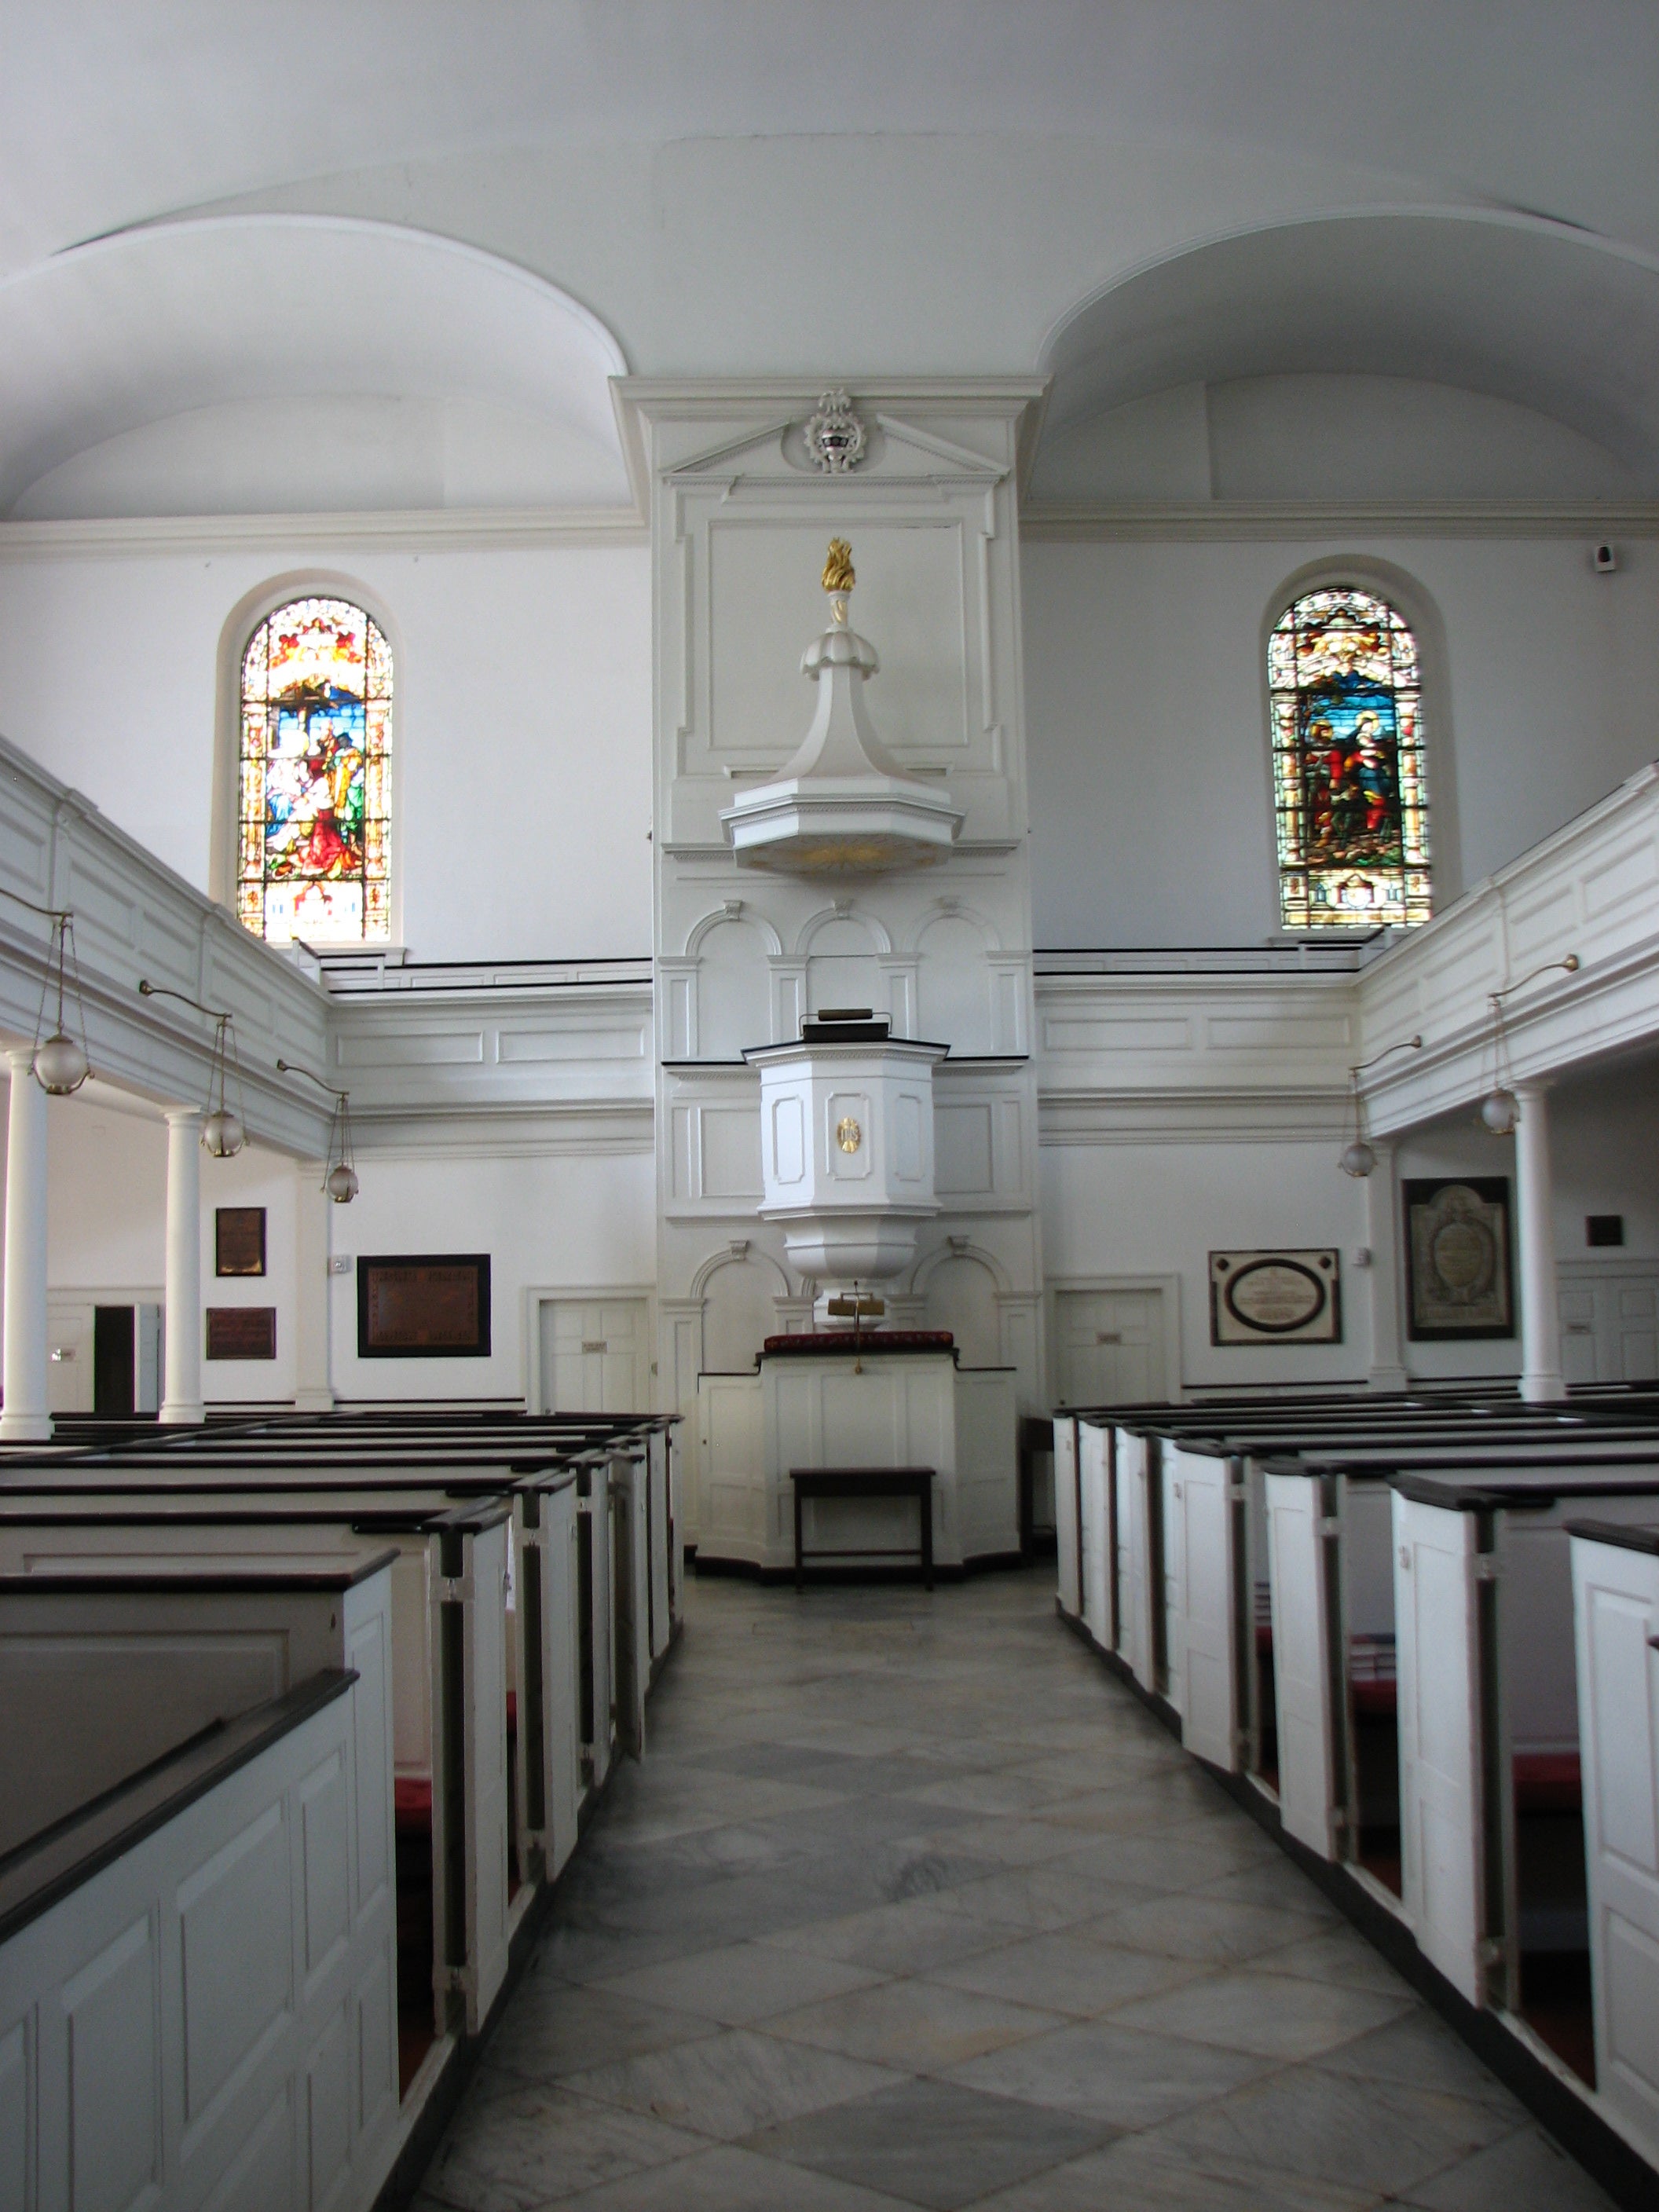 St. Peter’s high-backed pews were raised off the floor to keep drafts off the congregants.